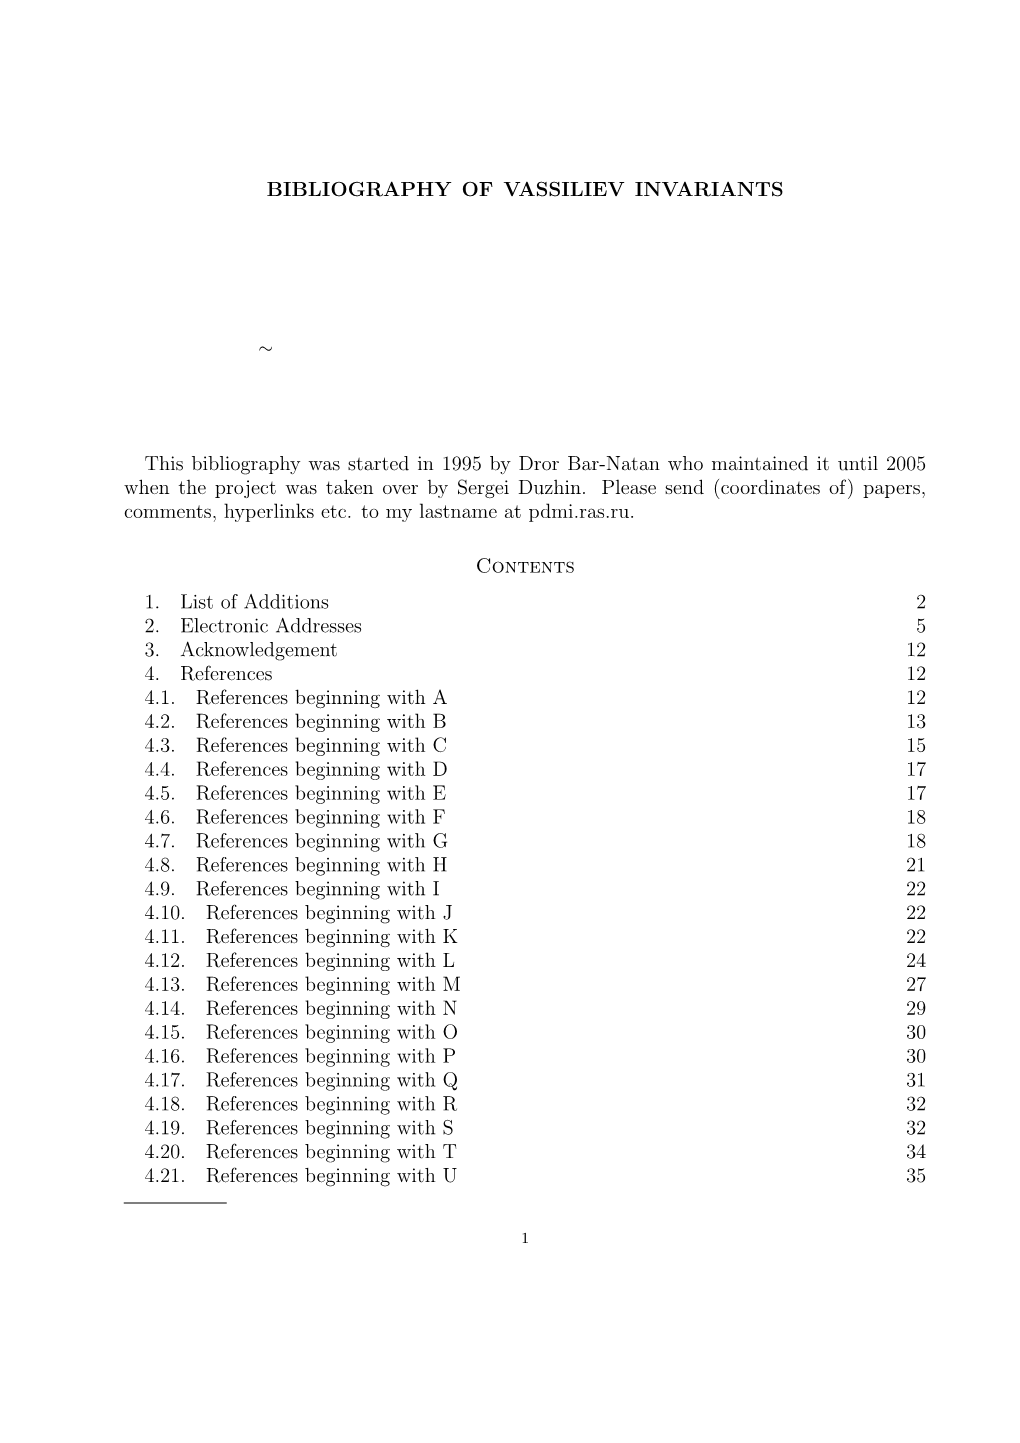 Bibliography of Vassiliev Invariants